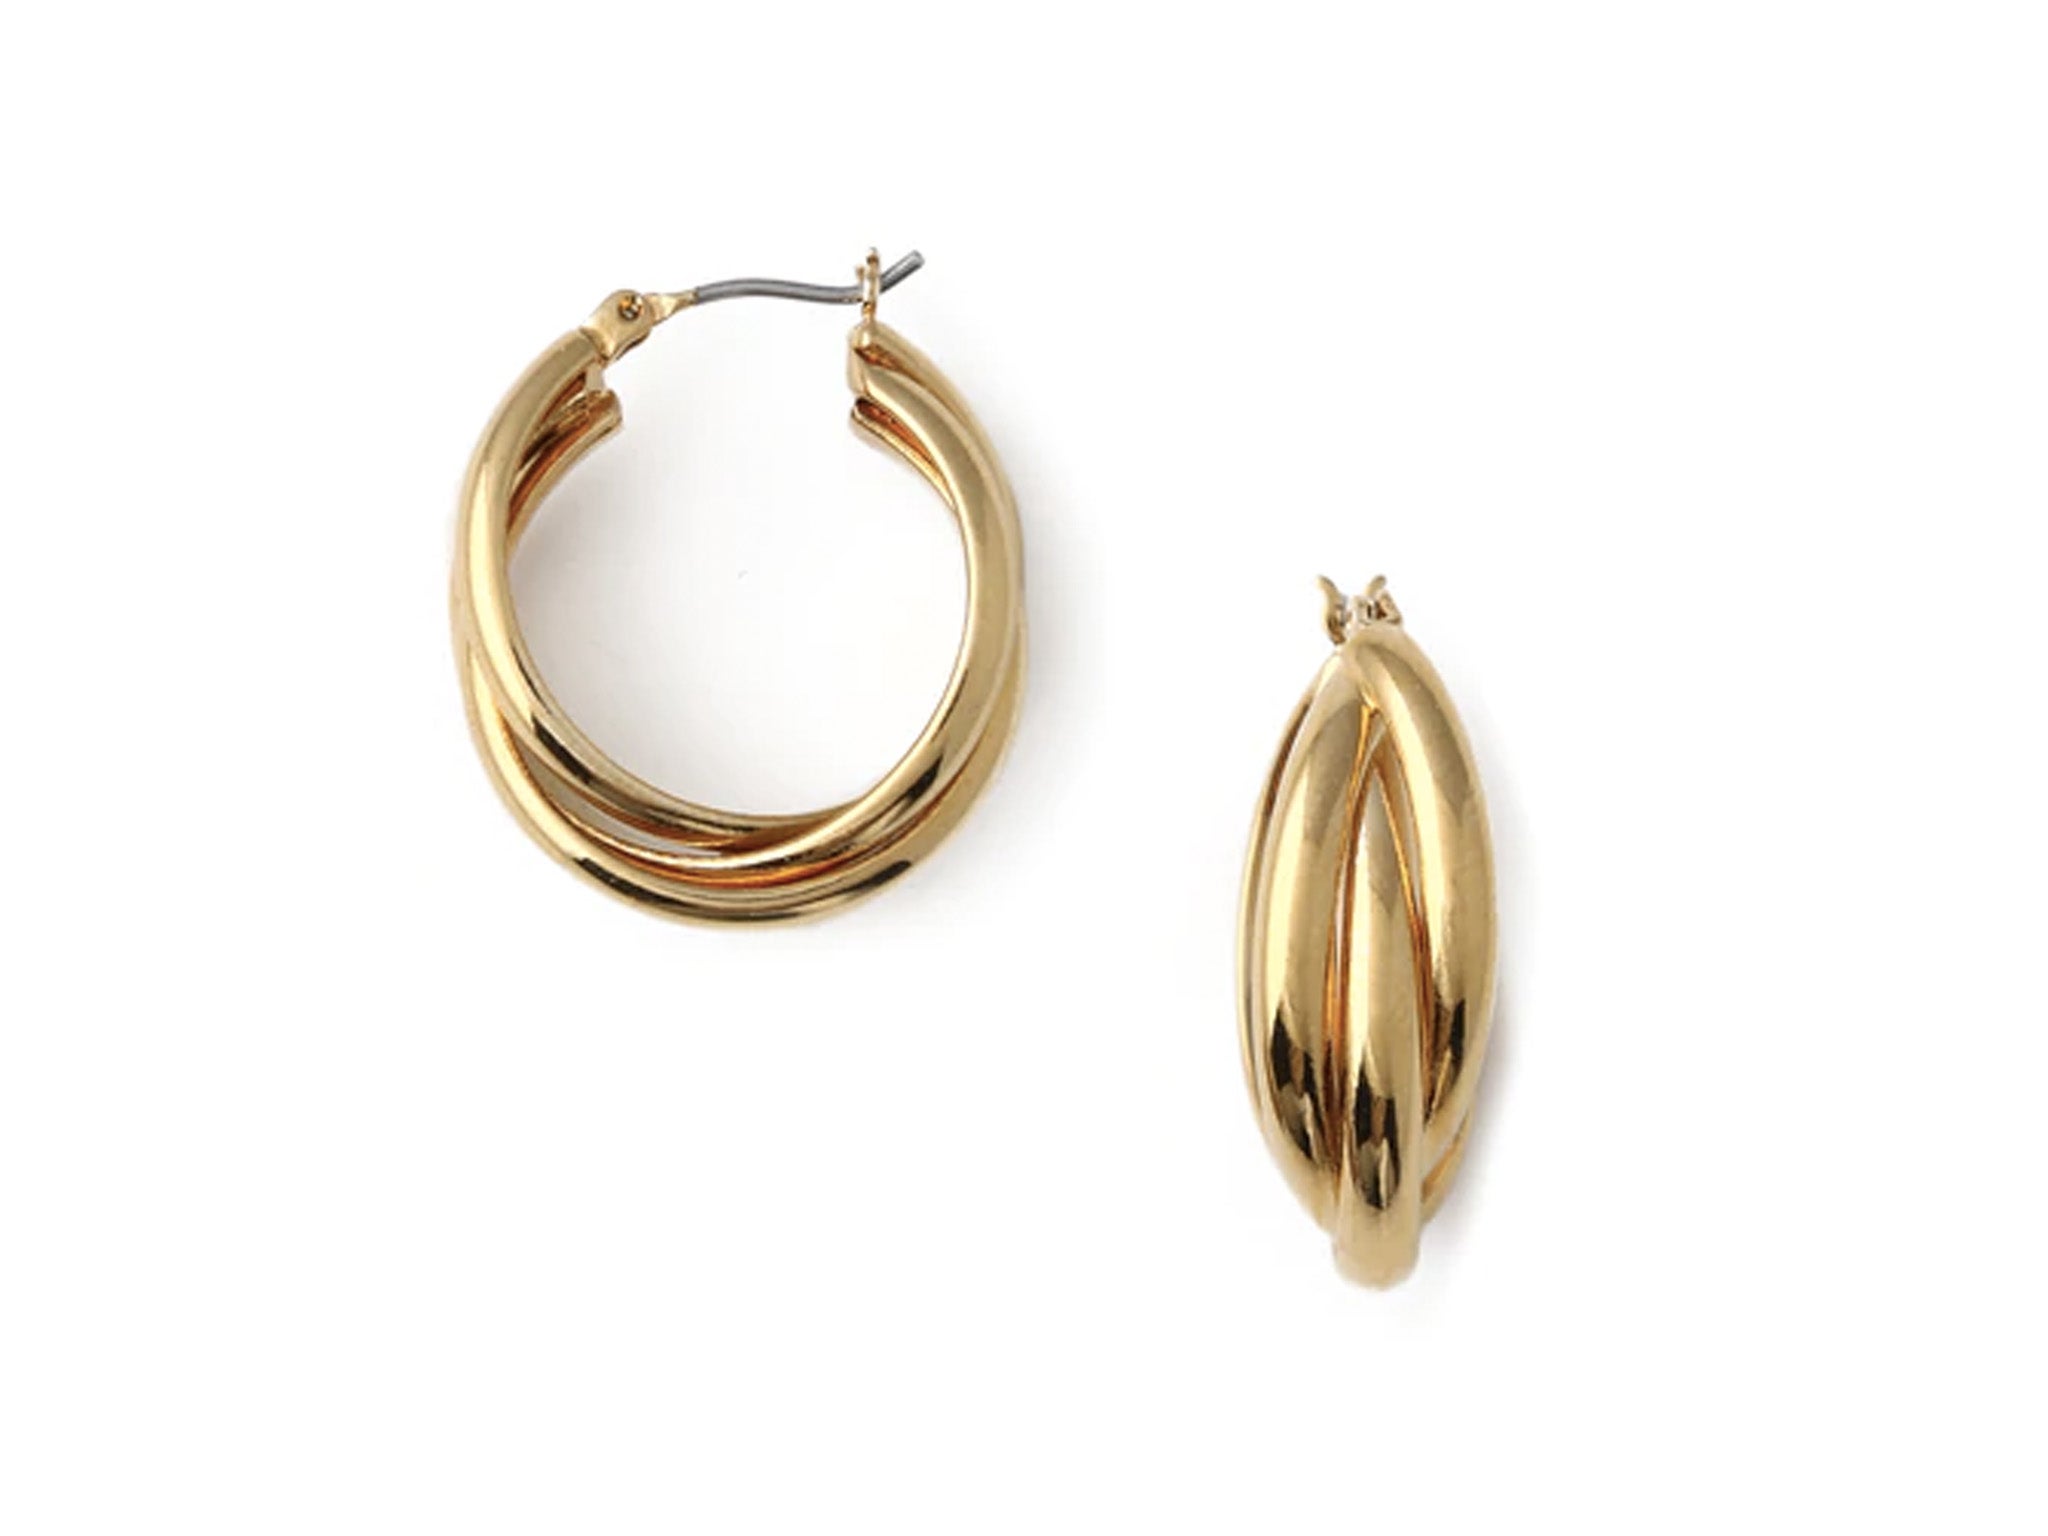 Best gold hoop earrings 2022: From Mejuri's braided style to Missoma's  chunky design